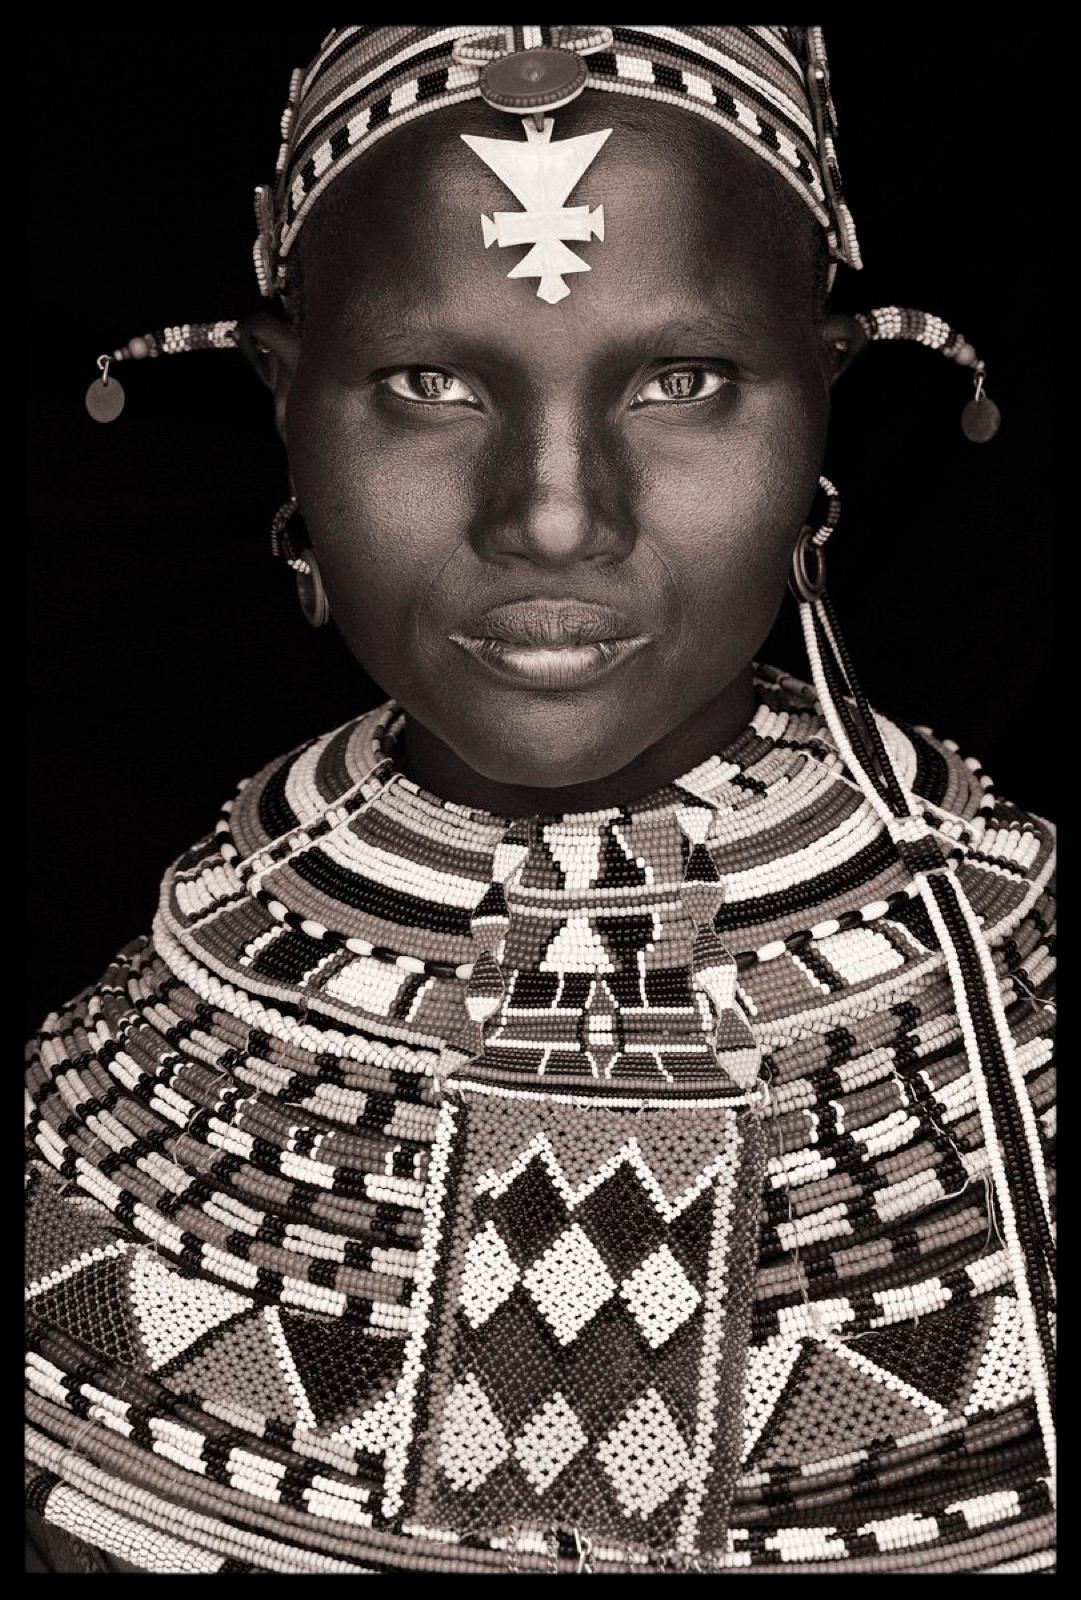 I met this young married Samburu in the middle of a busy market in western Kenya. She was with a group of  young women browsing the wooden stalls dotted across the dusty red earth in the lowlands of the Matthew’s Range. In Samburu communities young